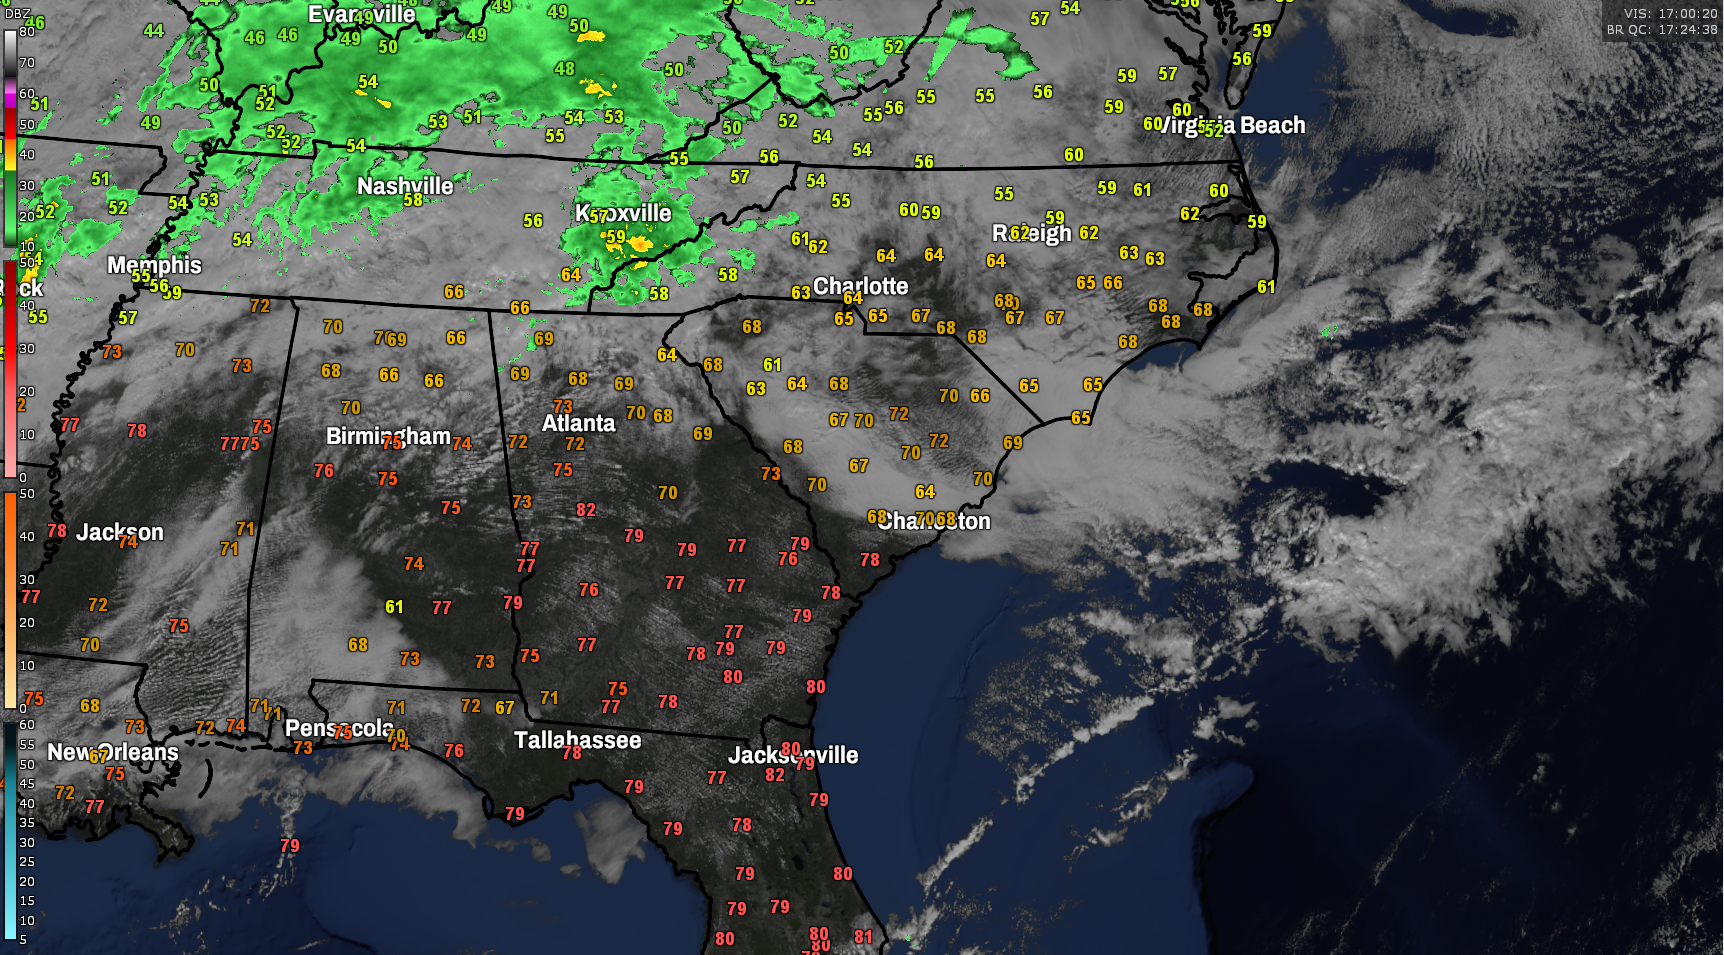 Satellite/radar composite across the Southeast showing cloud cover over the Charleston metro area with rain to the north.